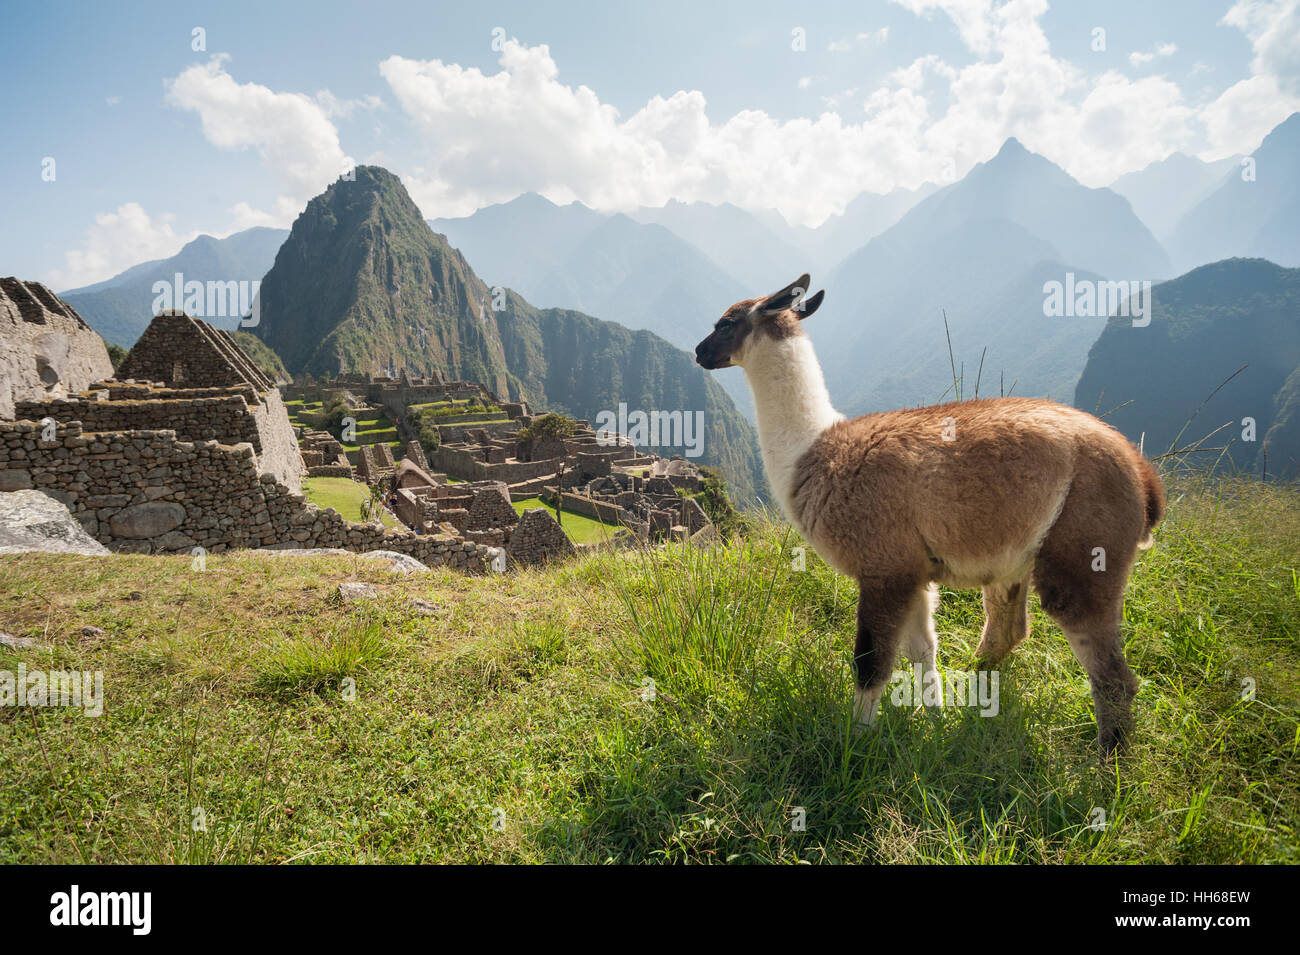 The ancient city of Machu Picchu, Peru. Llama overlooking ruins on the Inca citadel in the Andes Mountains and the river valley below Stock Photo